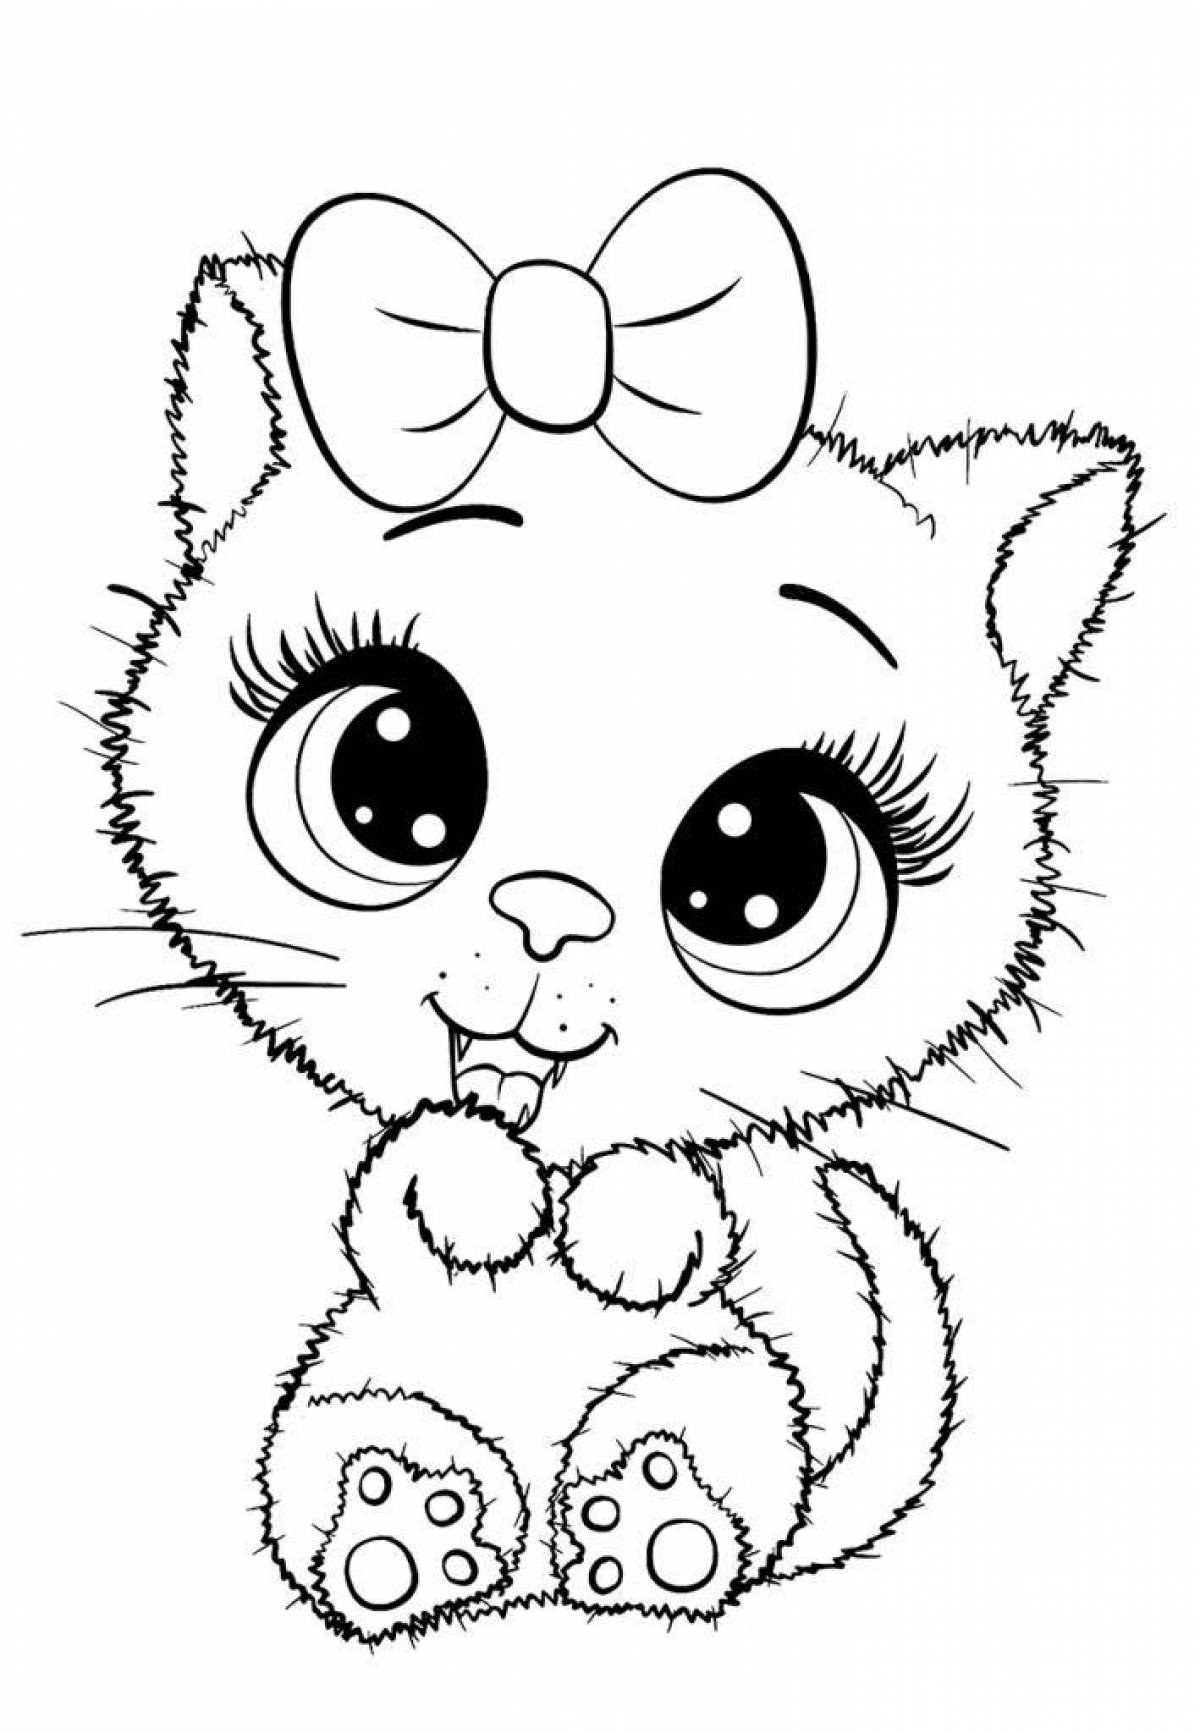 Quirky cute cat coloring book